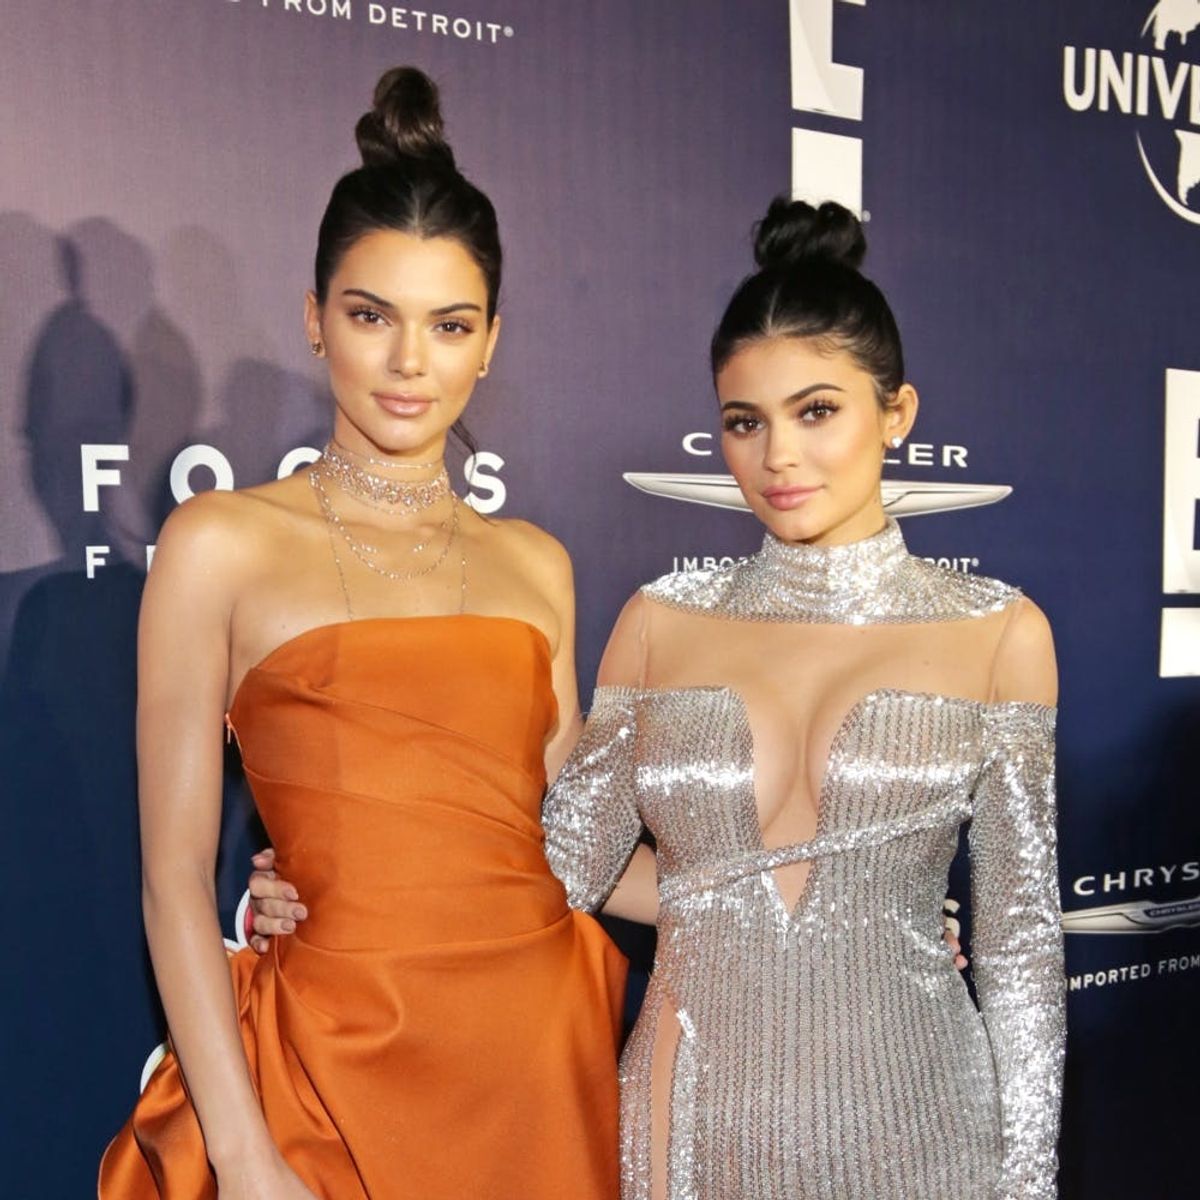 Kendall + Kylie Jenner Were Justifiably Freaked Out Over a Possible Break-In